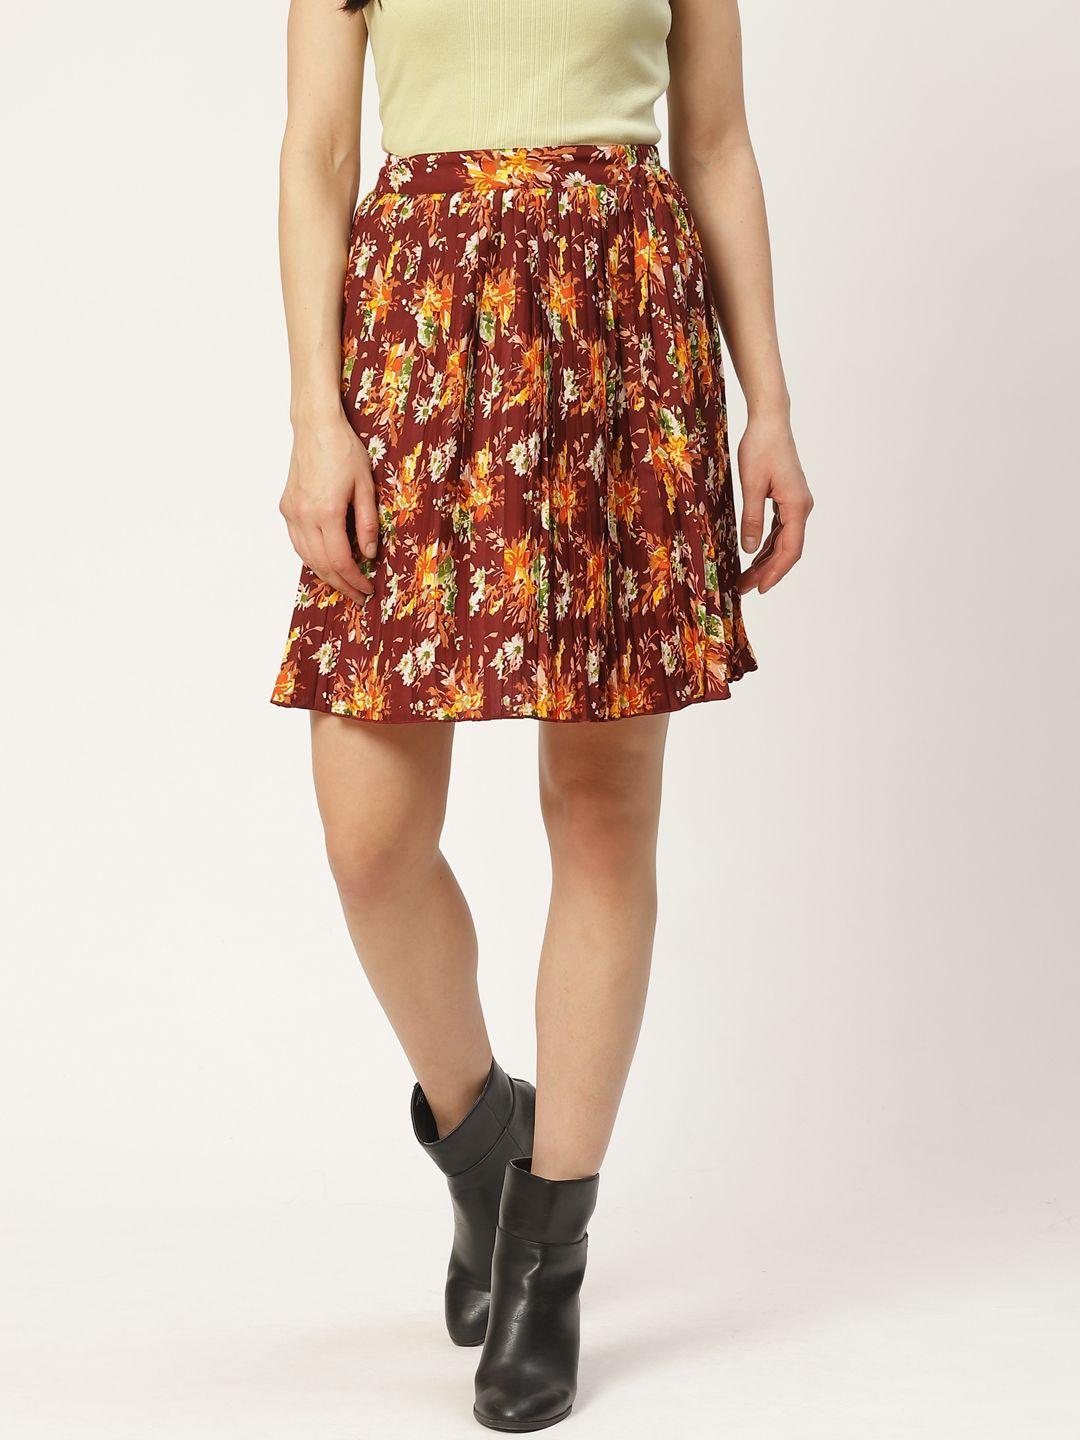 antheaa-women-rust-red-&-yellow-accordion-pleated-floral-printed-a-line-skirt